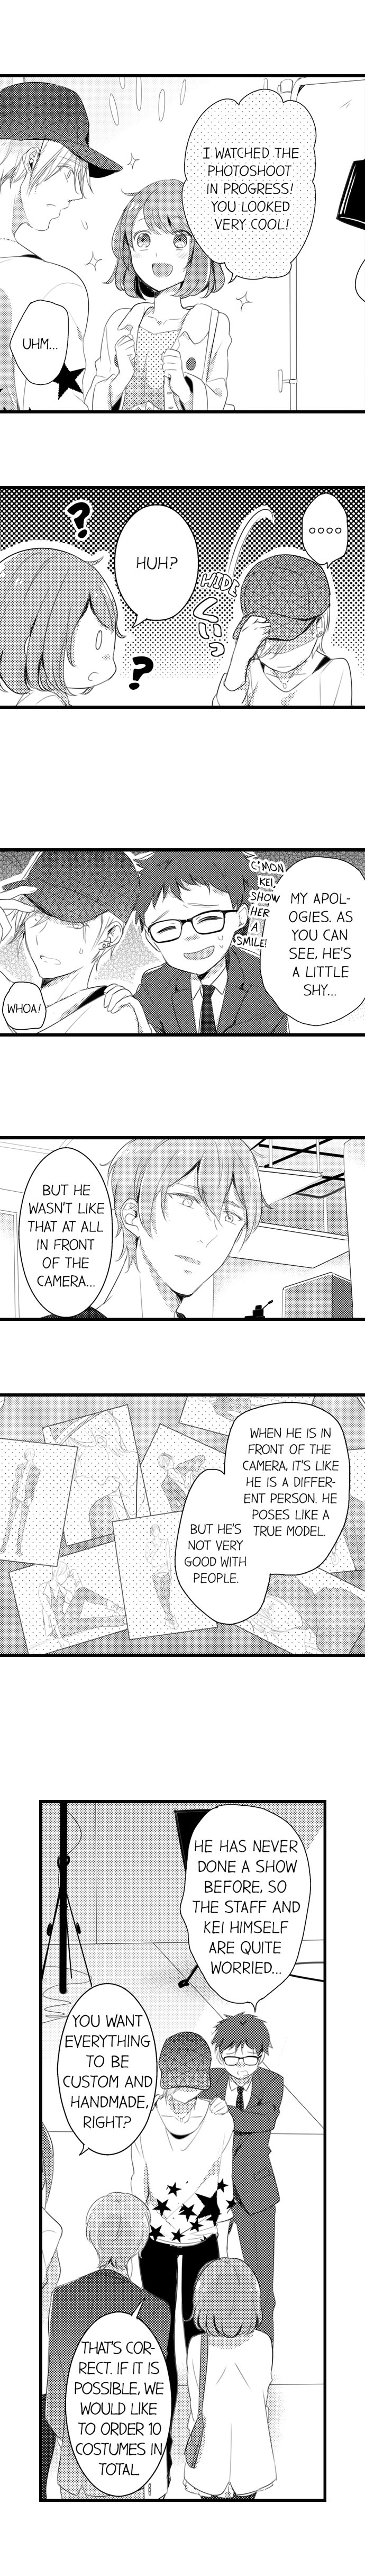 A Hot Night With My Boss in a Capsule Hotel - Chapter 11 Page 6